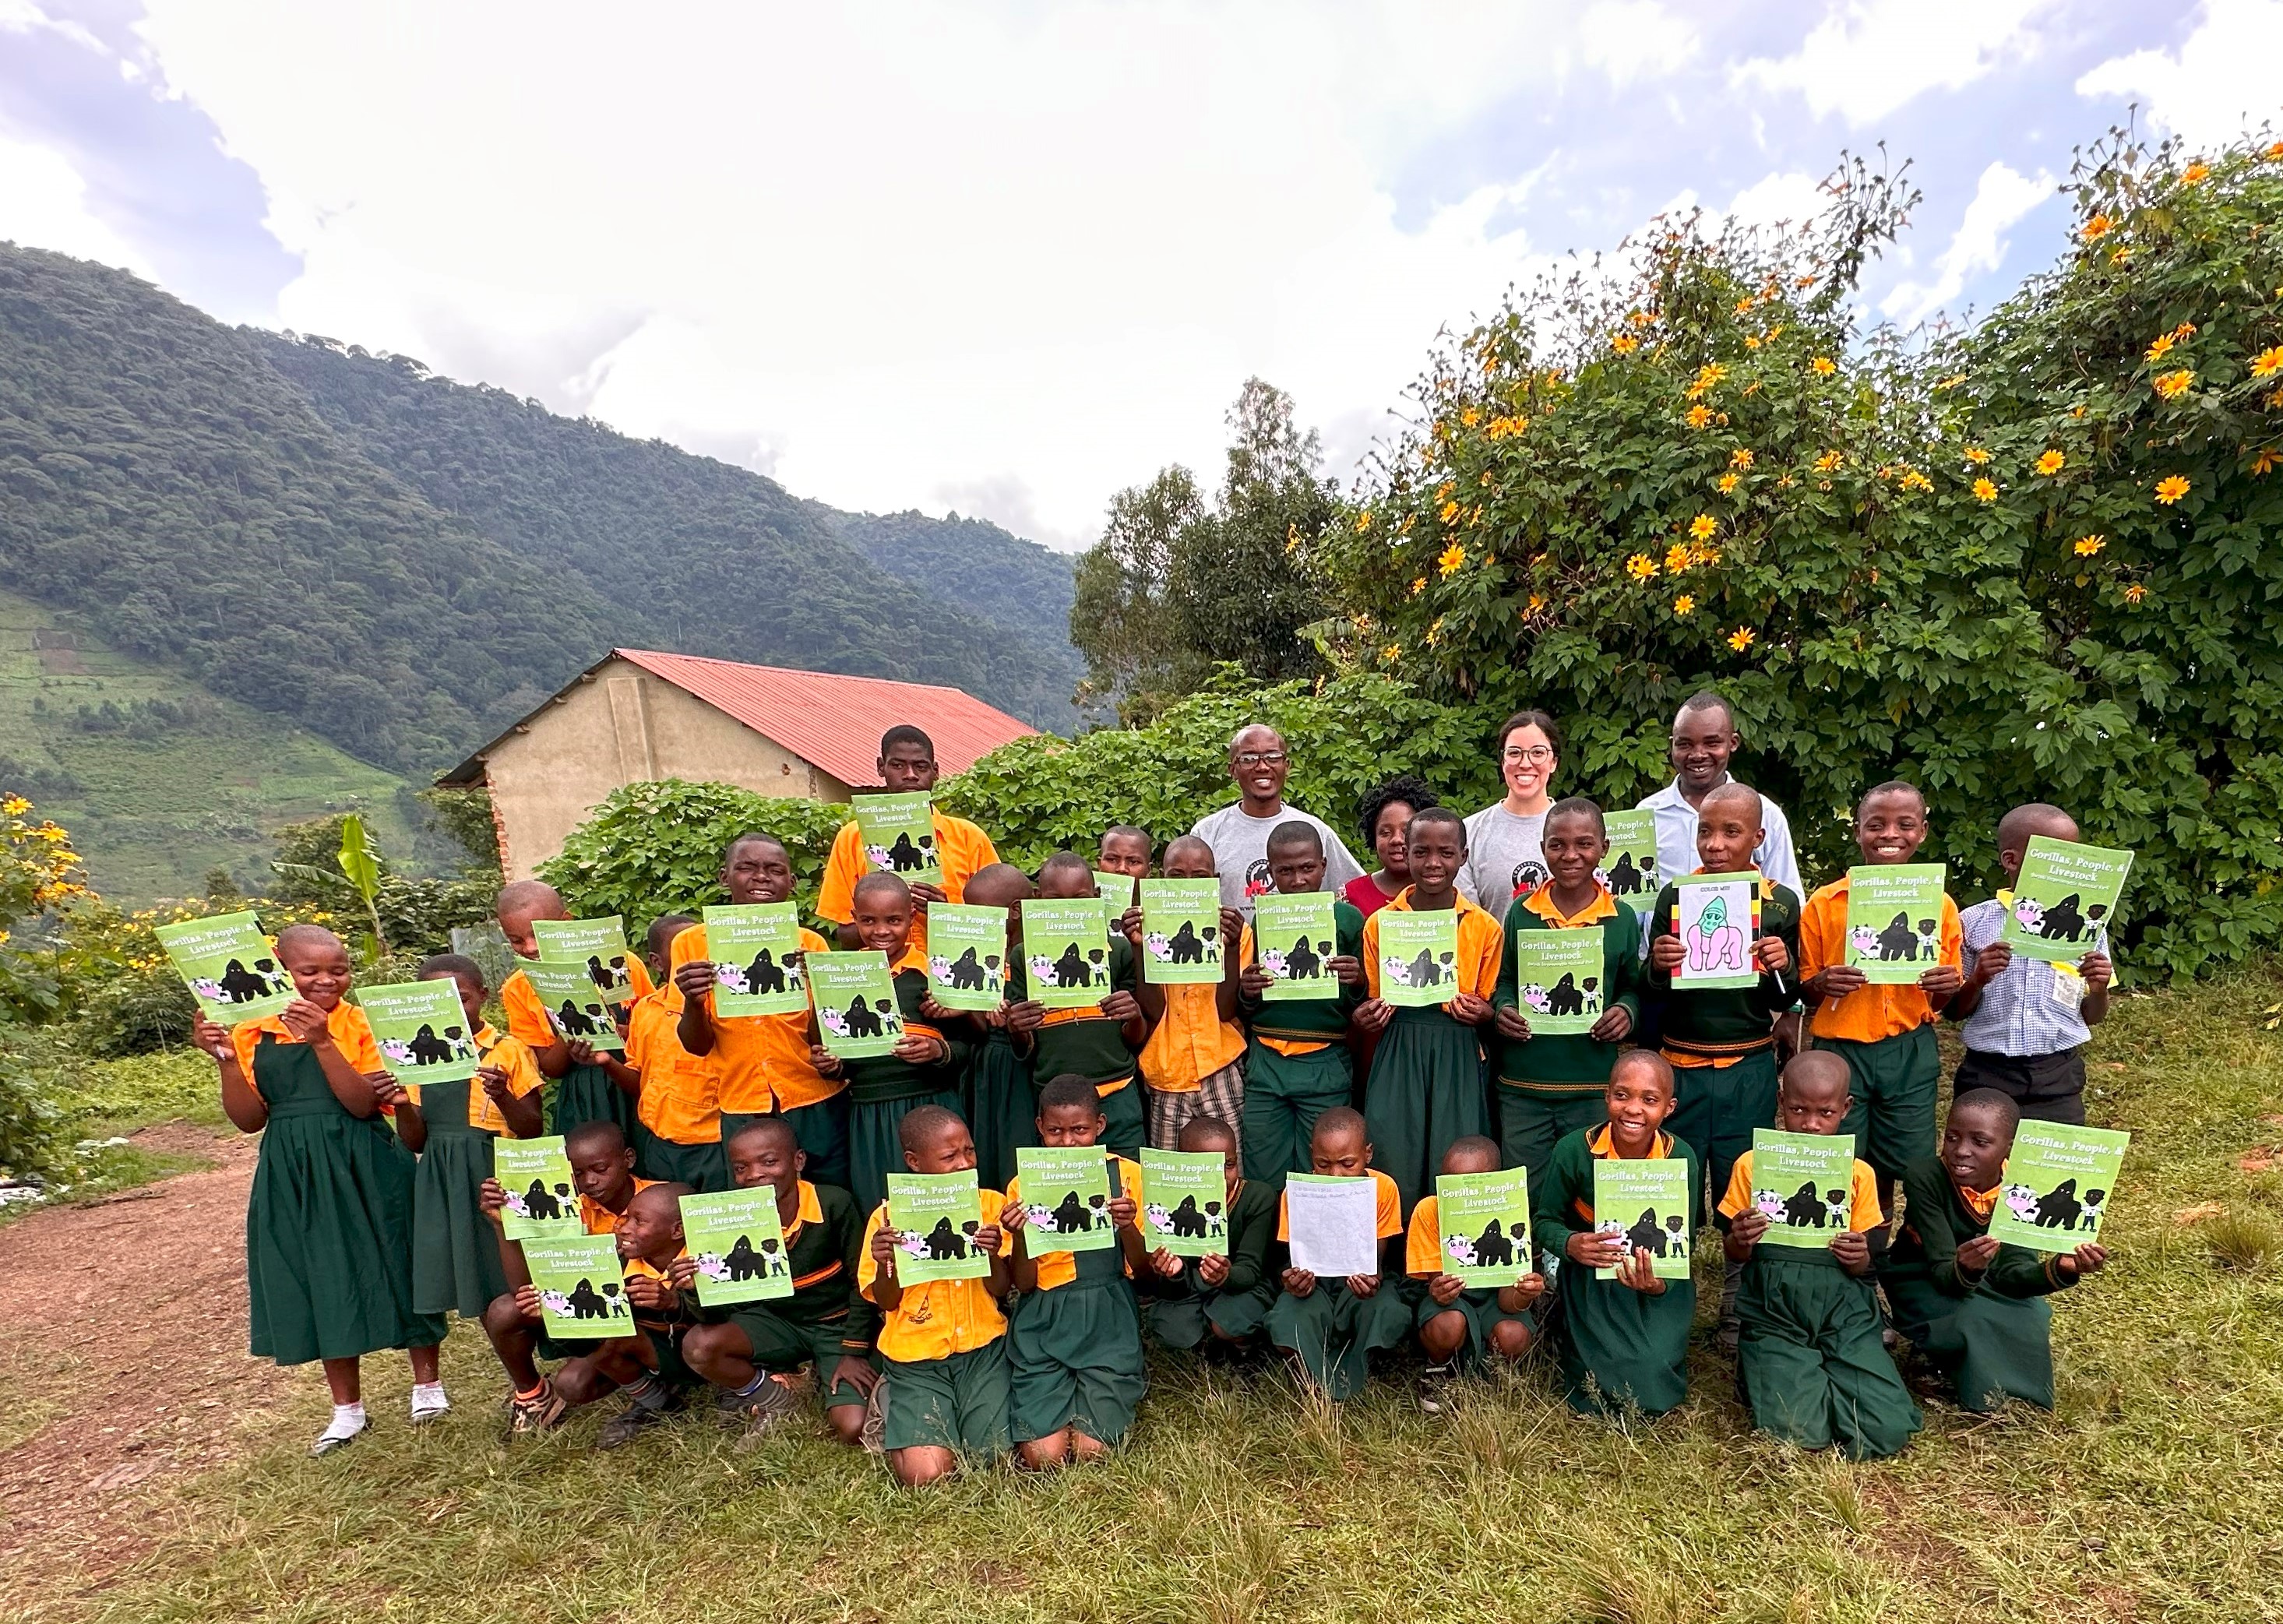 Students at St. Matthews primary school in Bwindi completing the workbook: "Gorillas, Livestock, and People”